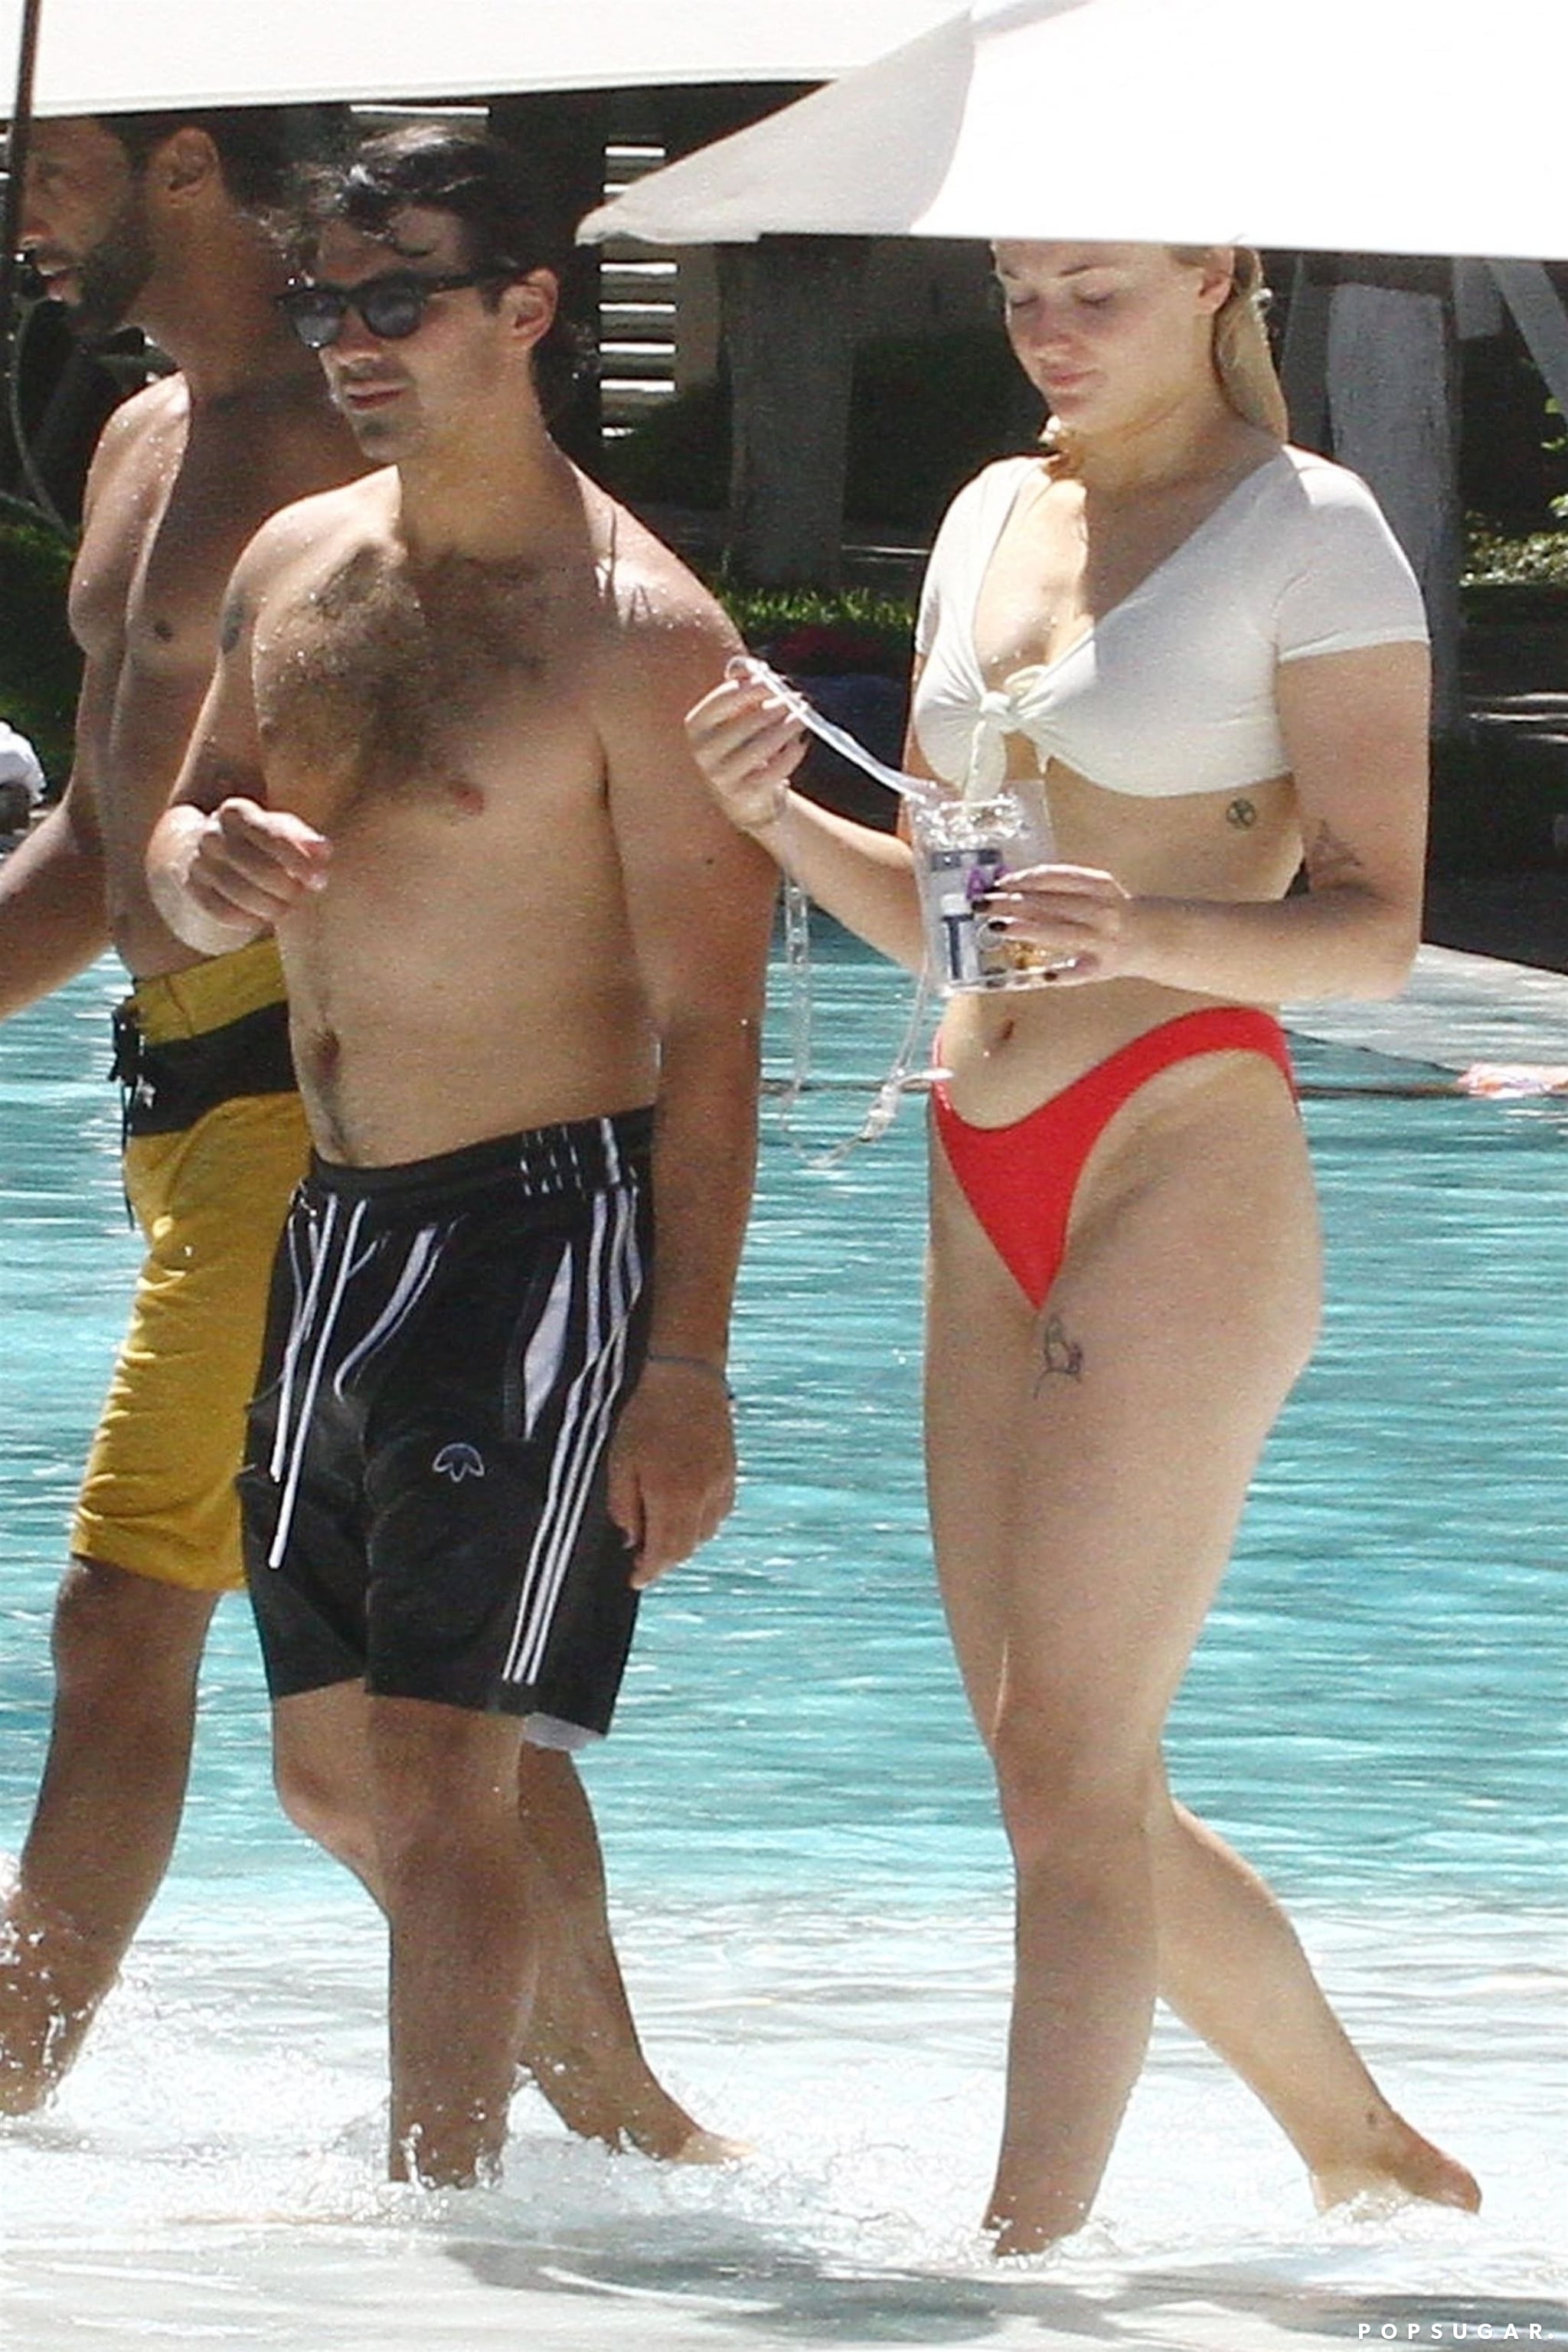 Sophie Turner In White Corset Top: Shows PDA With Joe Jonas In